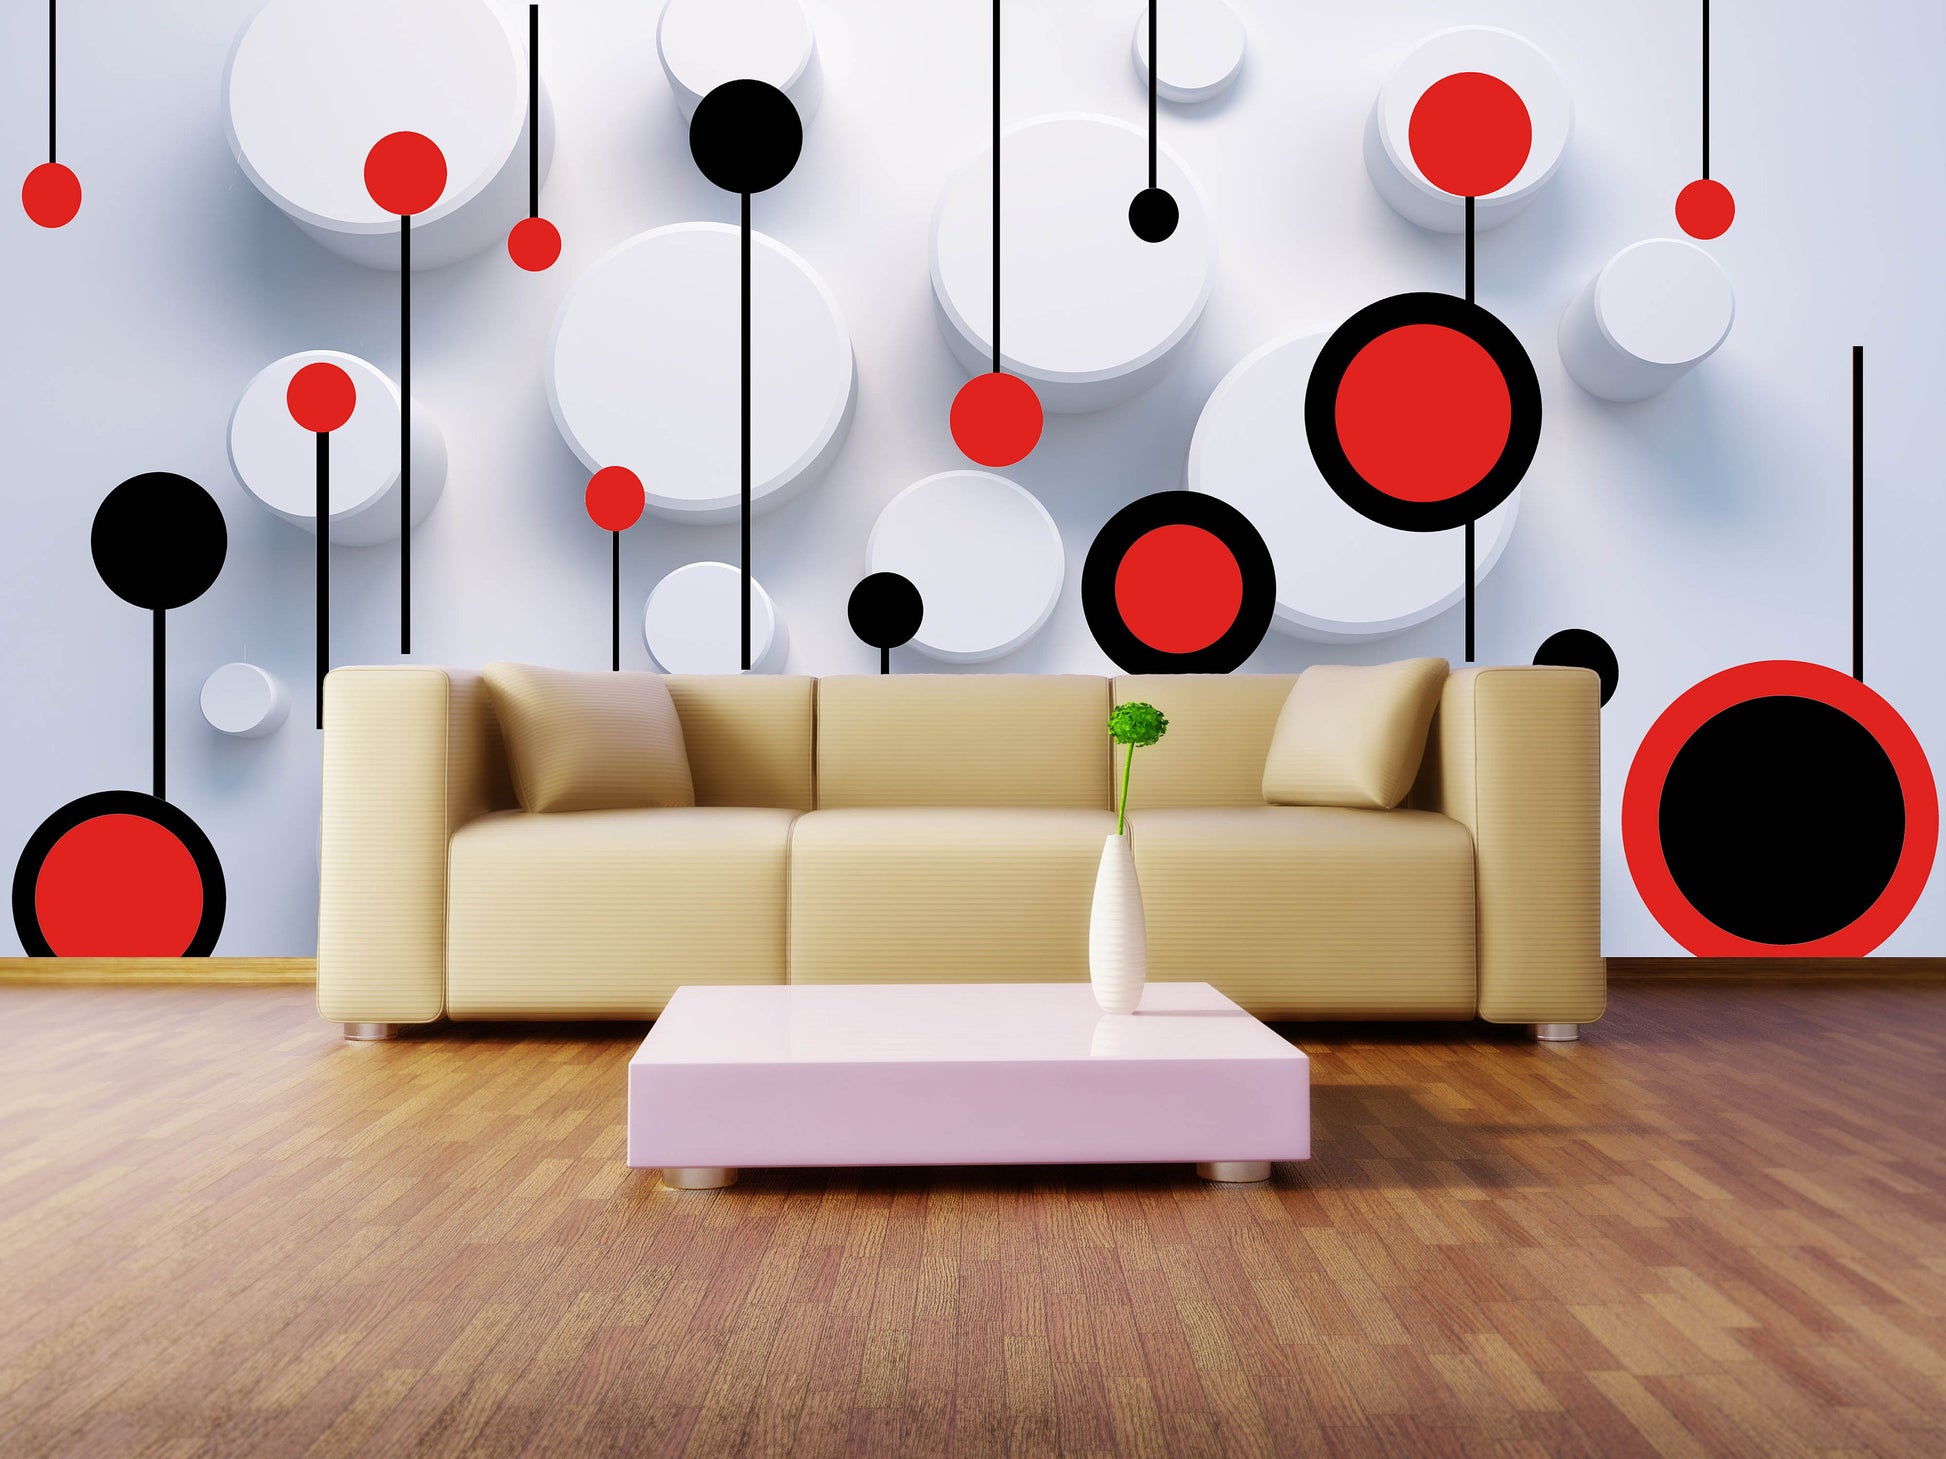 Abstract wallpaper Minimalist wall decor Peel and stick wallpaper Photo wallpaper Removable wallpaper art deco wallpaper Bedroom wall decor